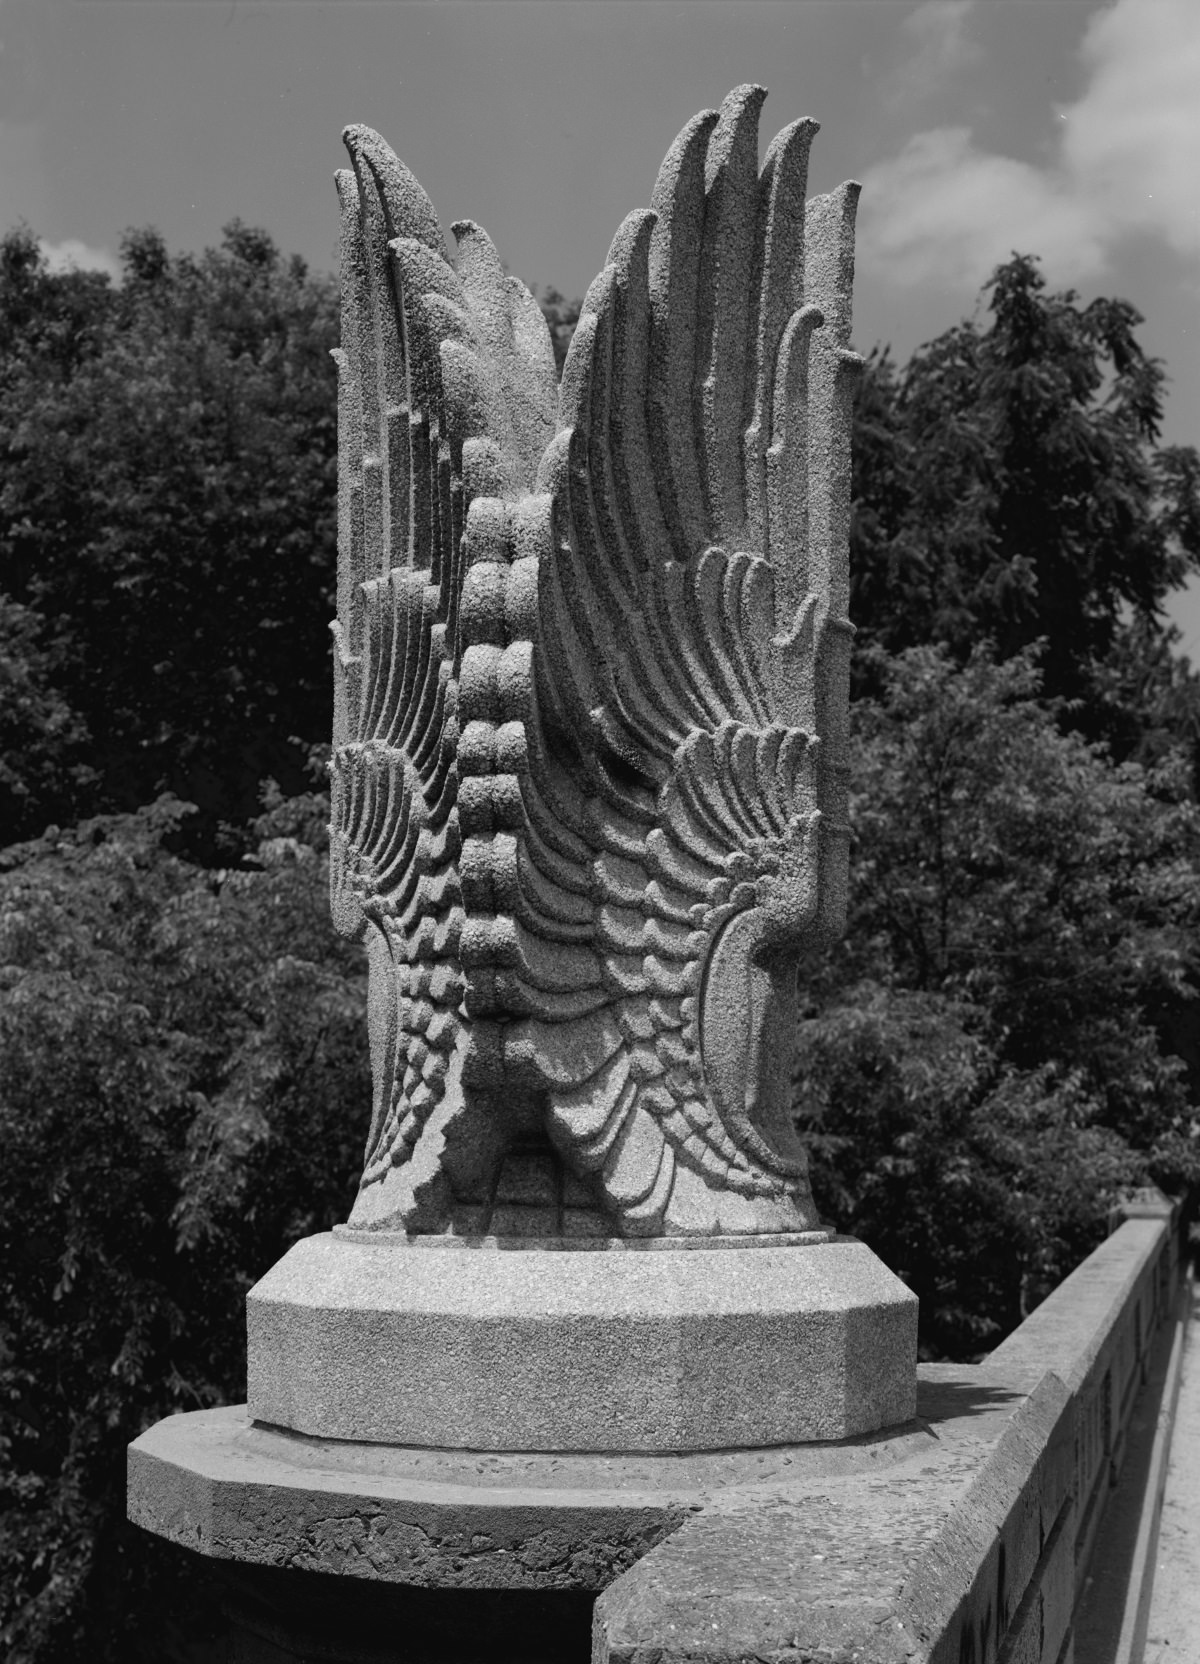 Detail of Raised Wing Sculpture